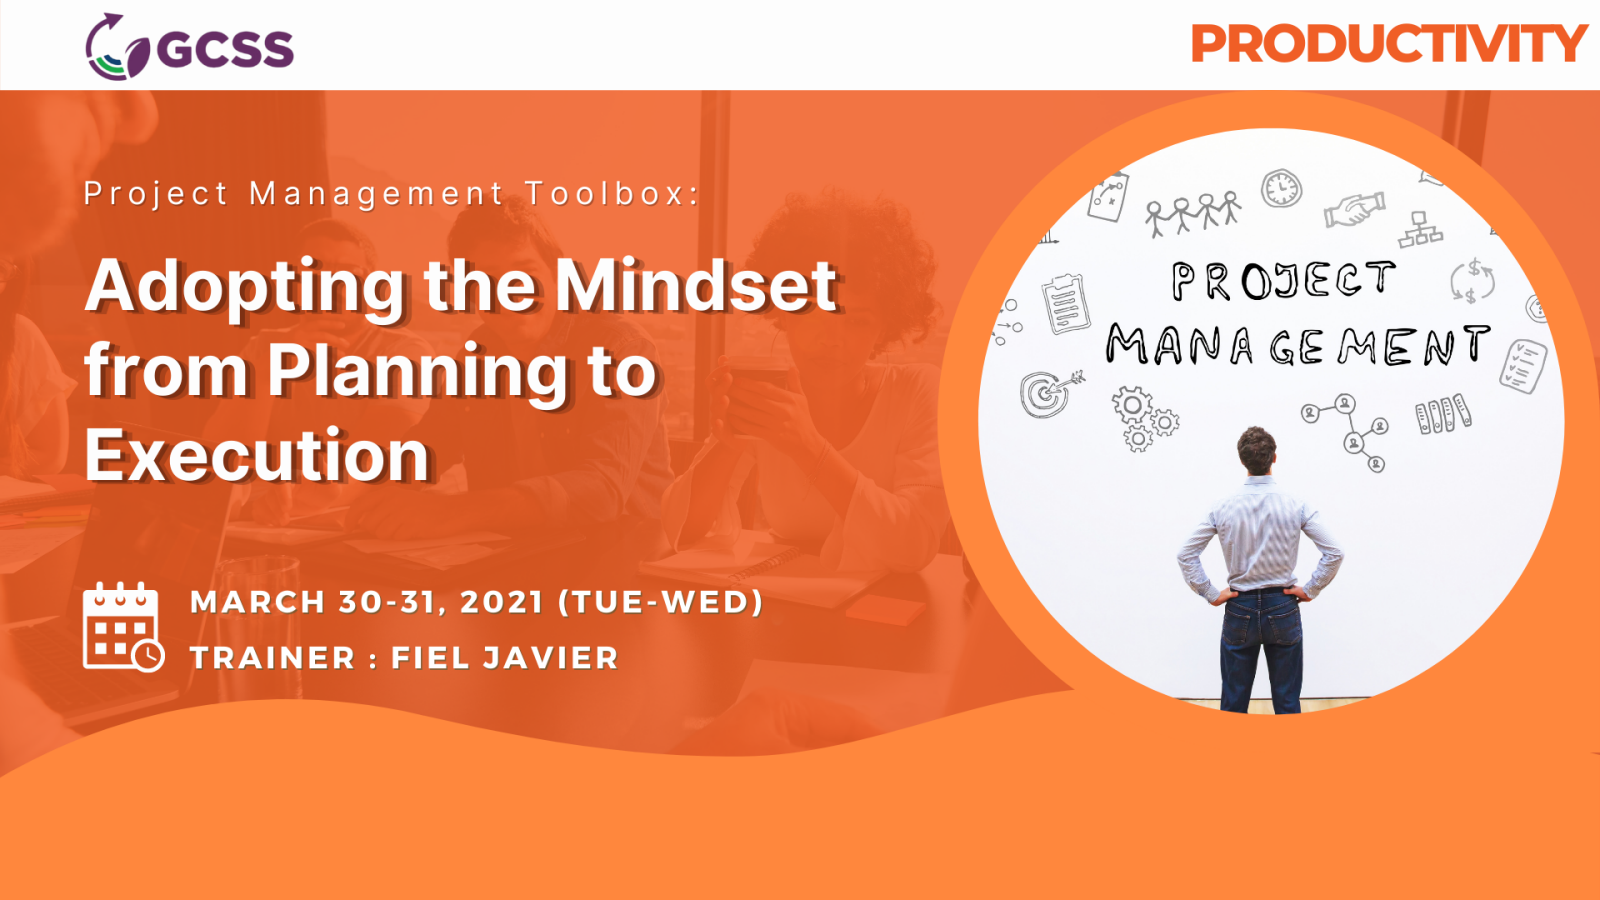 Project Management Toolbox: Adopting the Mindset from Planning to Execution, Manila, National Capital Region, Philippines